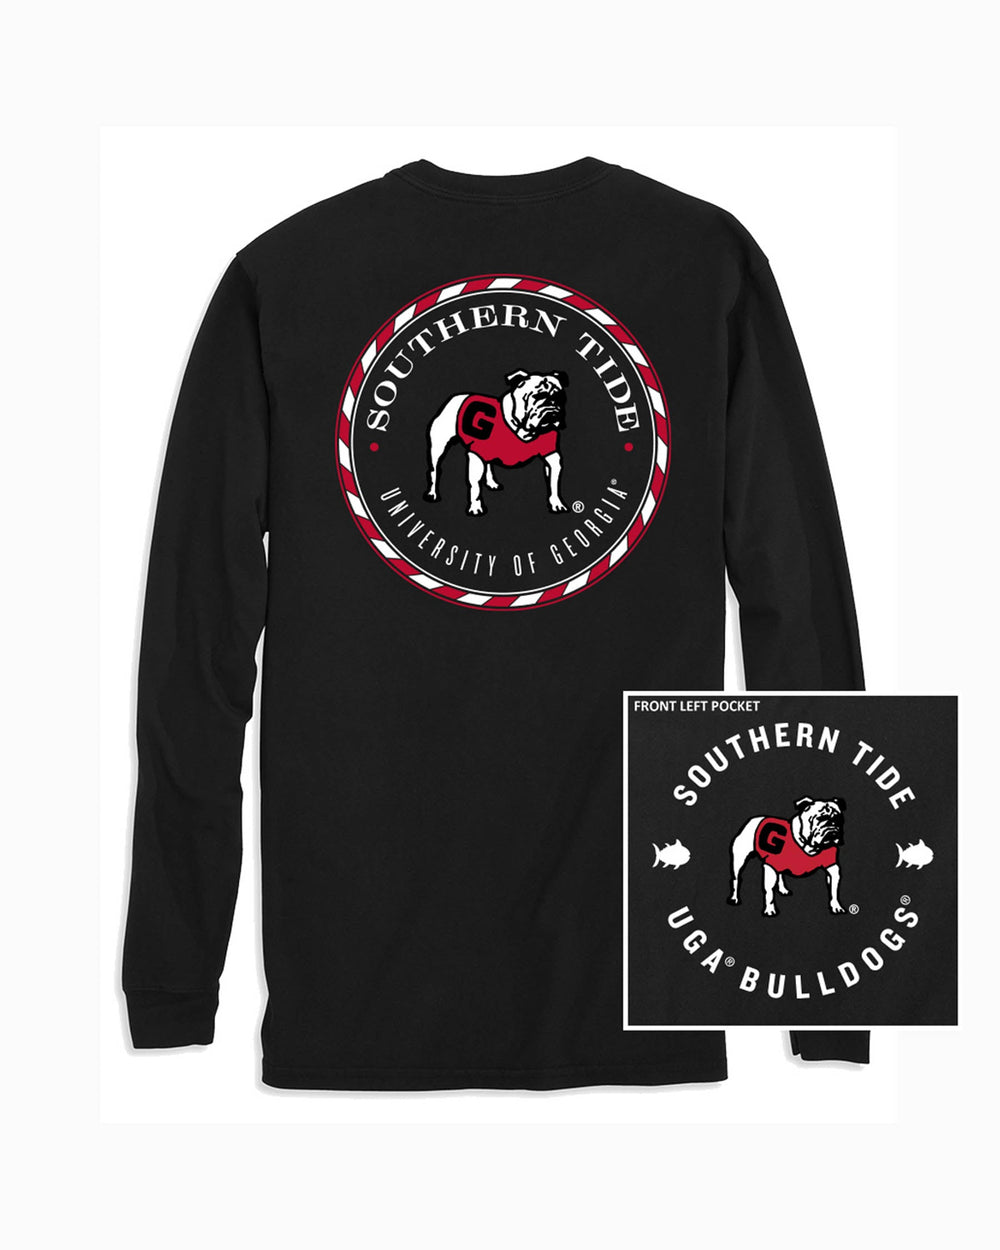 The front and back of the Georgia Bulldogs Long Sleeve Medallion Logo T-Shirt by Southern tide - Black